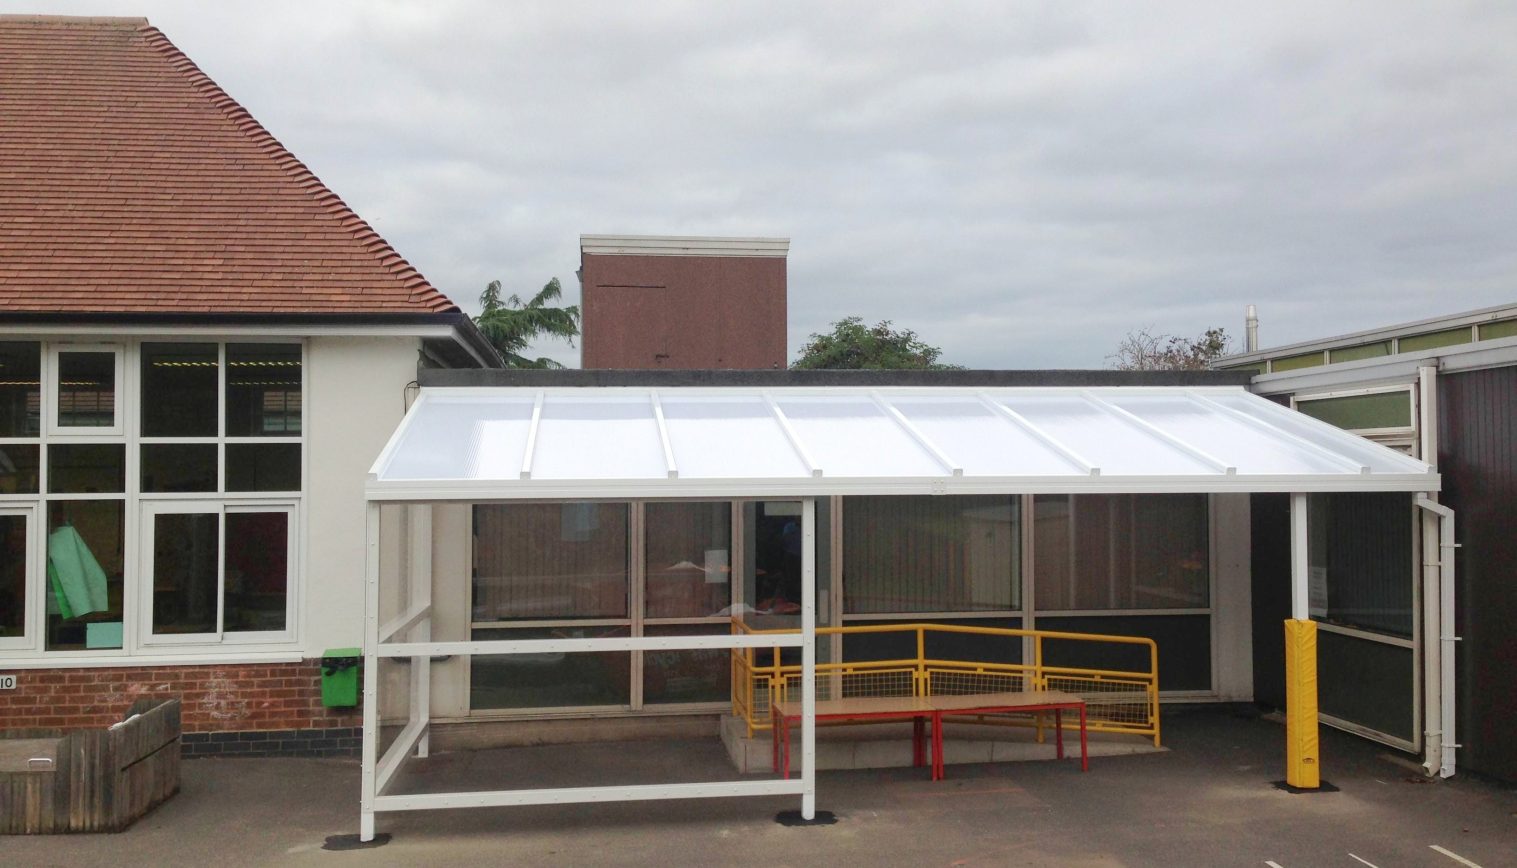 Orston Primary School, Nottinghamshire – 2nd Wall Mounted Canopy